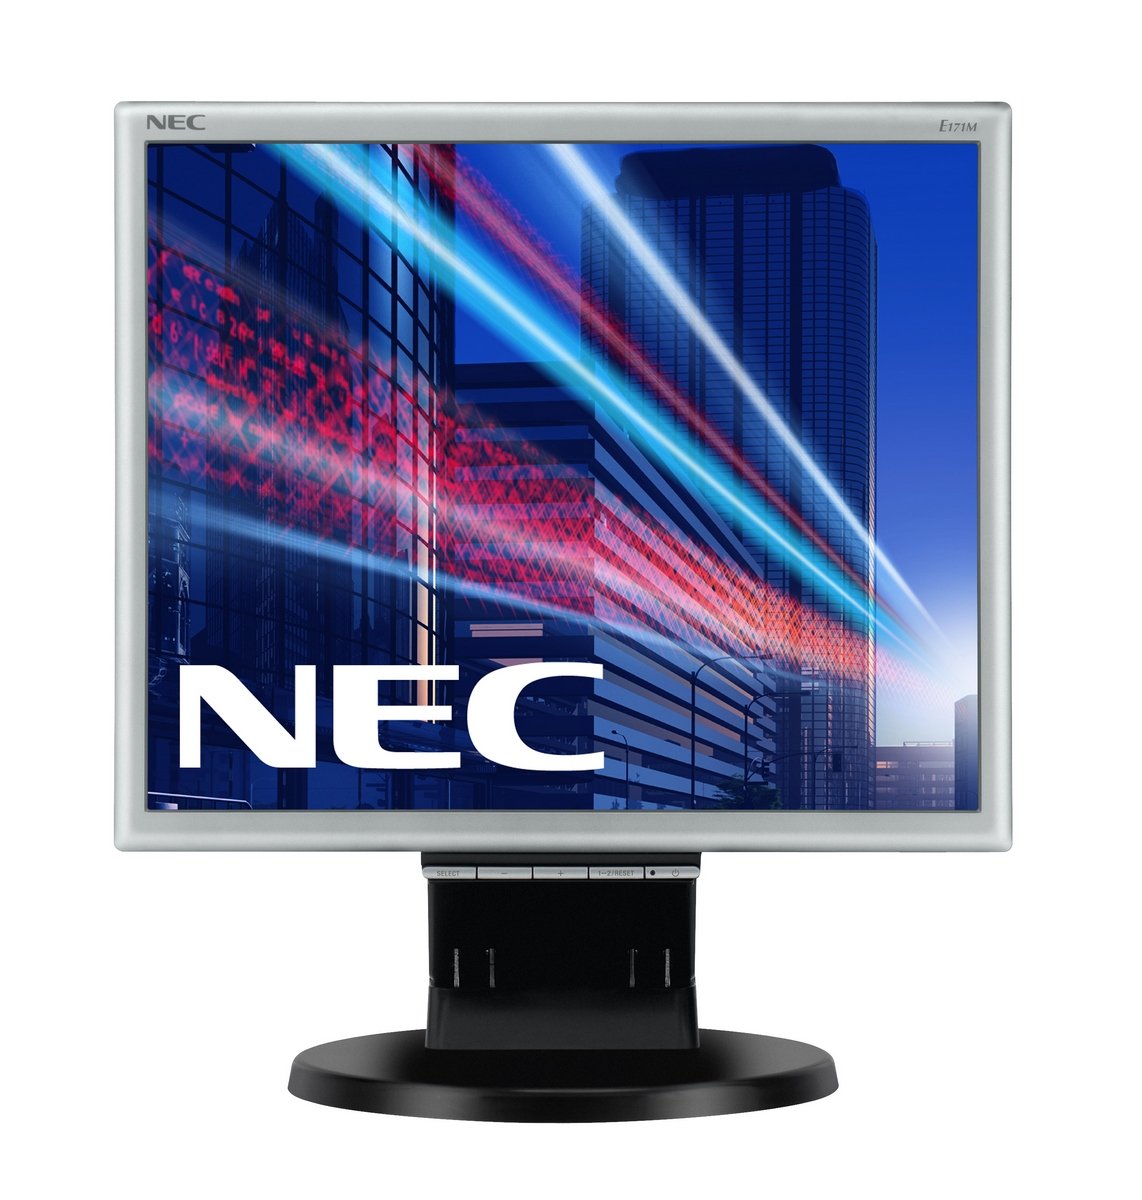 E171m Led 43 27 17in Ana Dig Nec Display Solutions 60003582 5028695110779